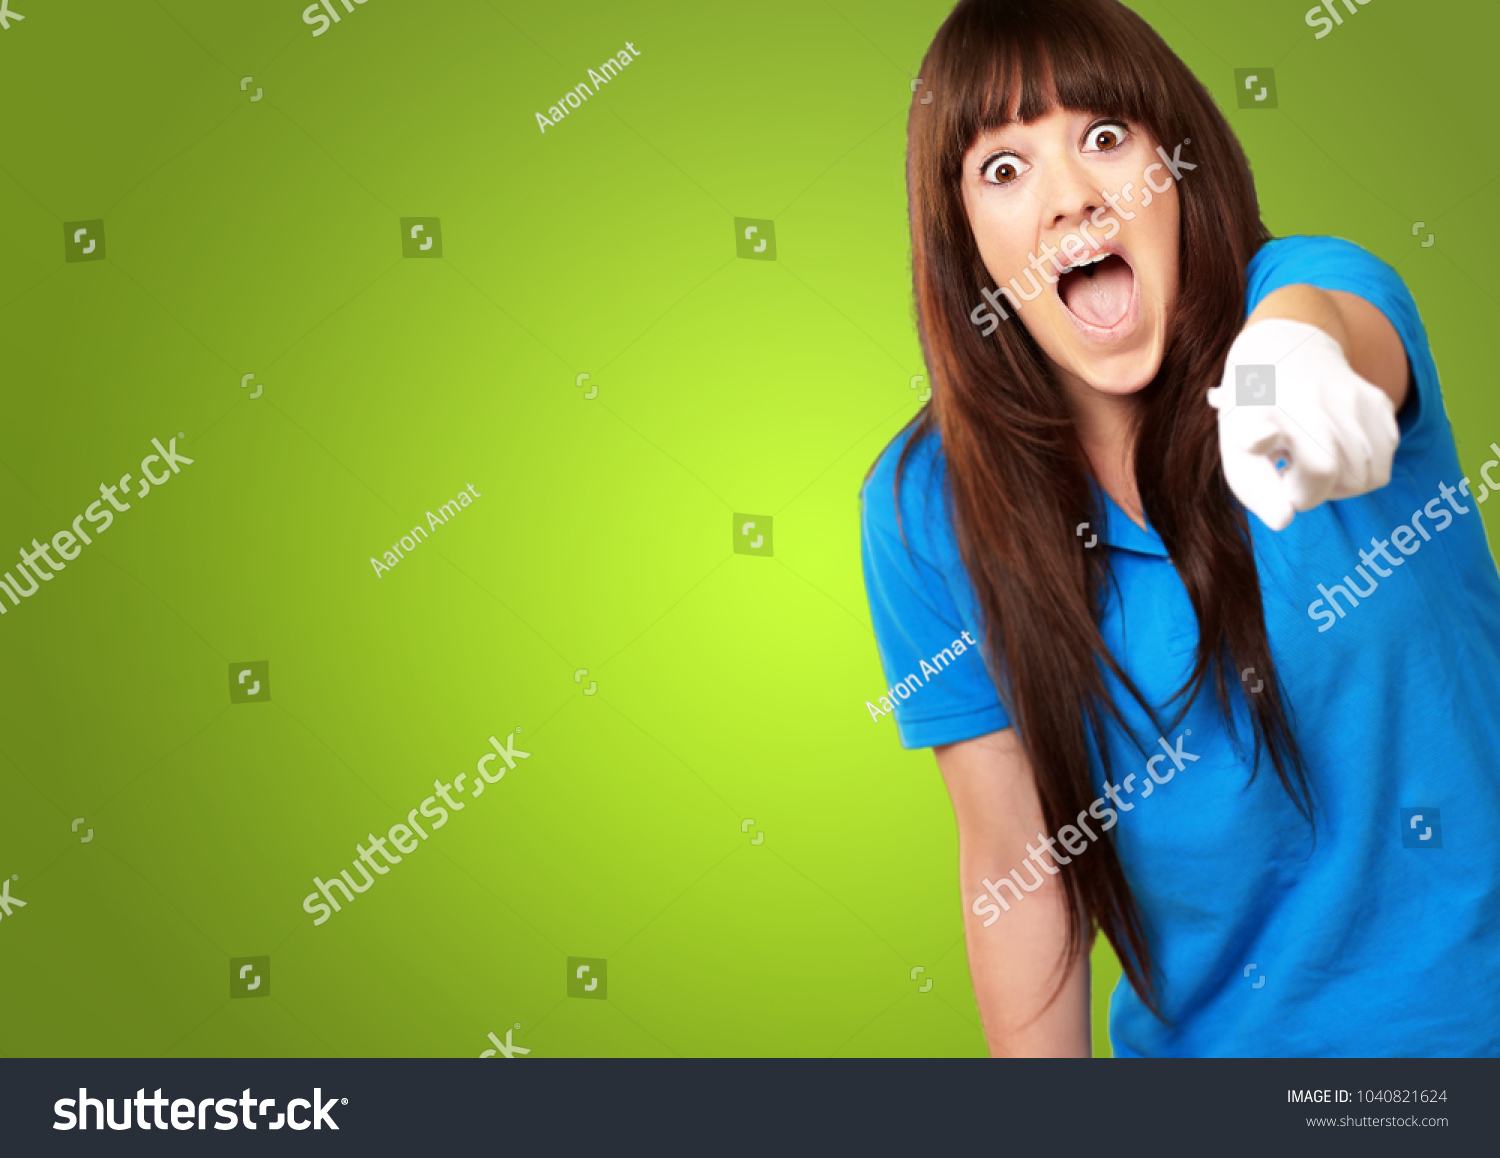 Woman Screaming Pointing Finger Isolated On Stock Photo 1040821624